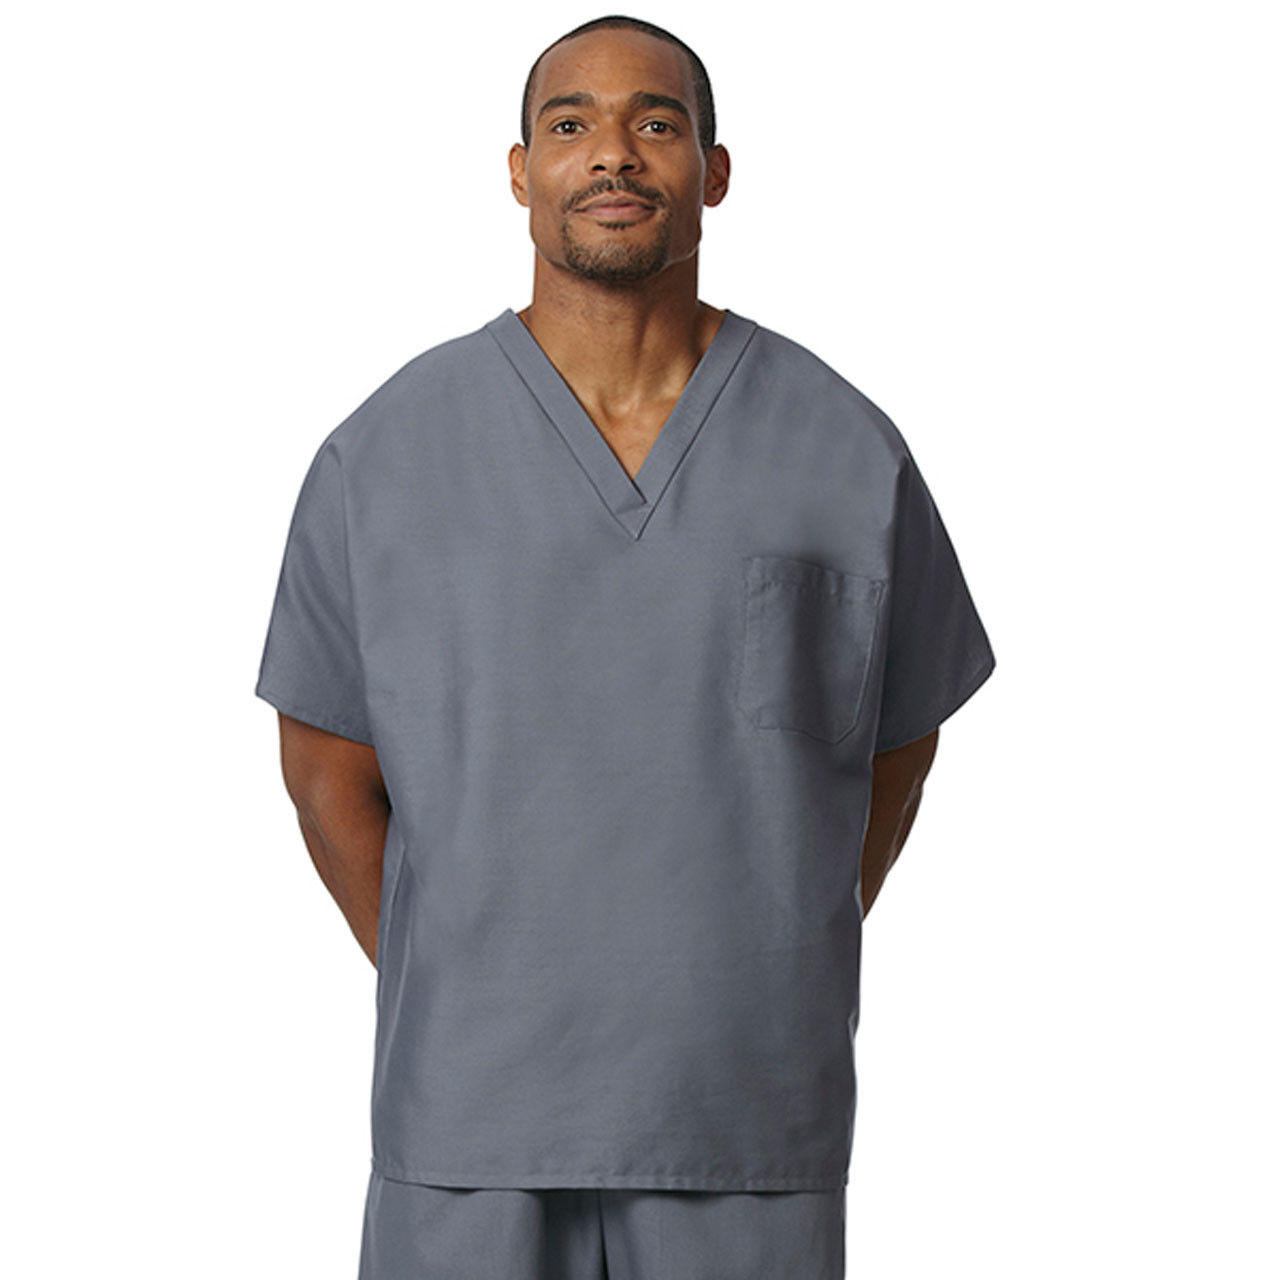 Are the Gray Scrub Tops suitable for taller individuals?